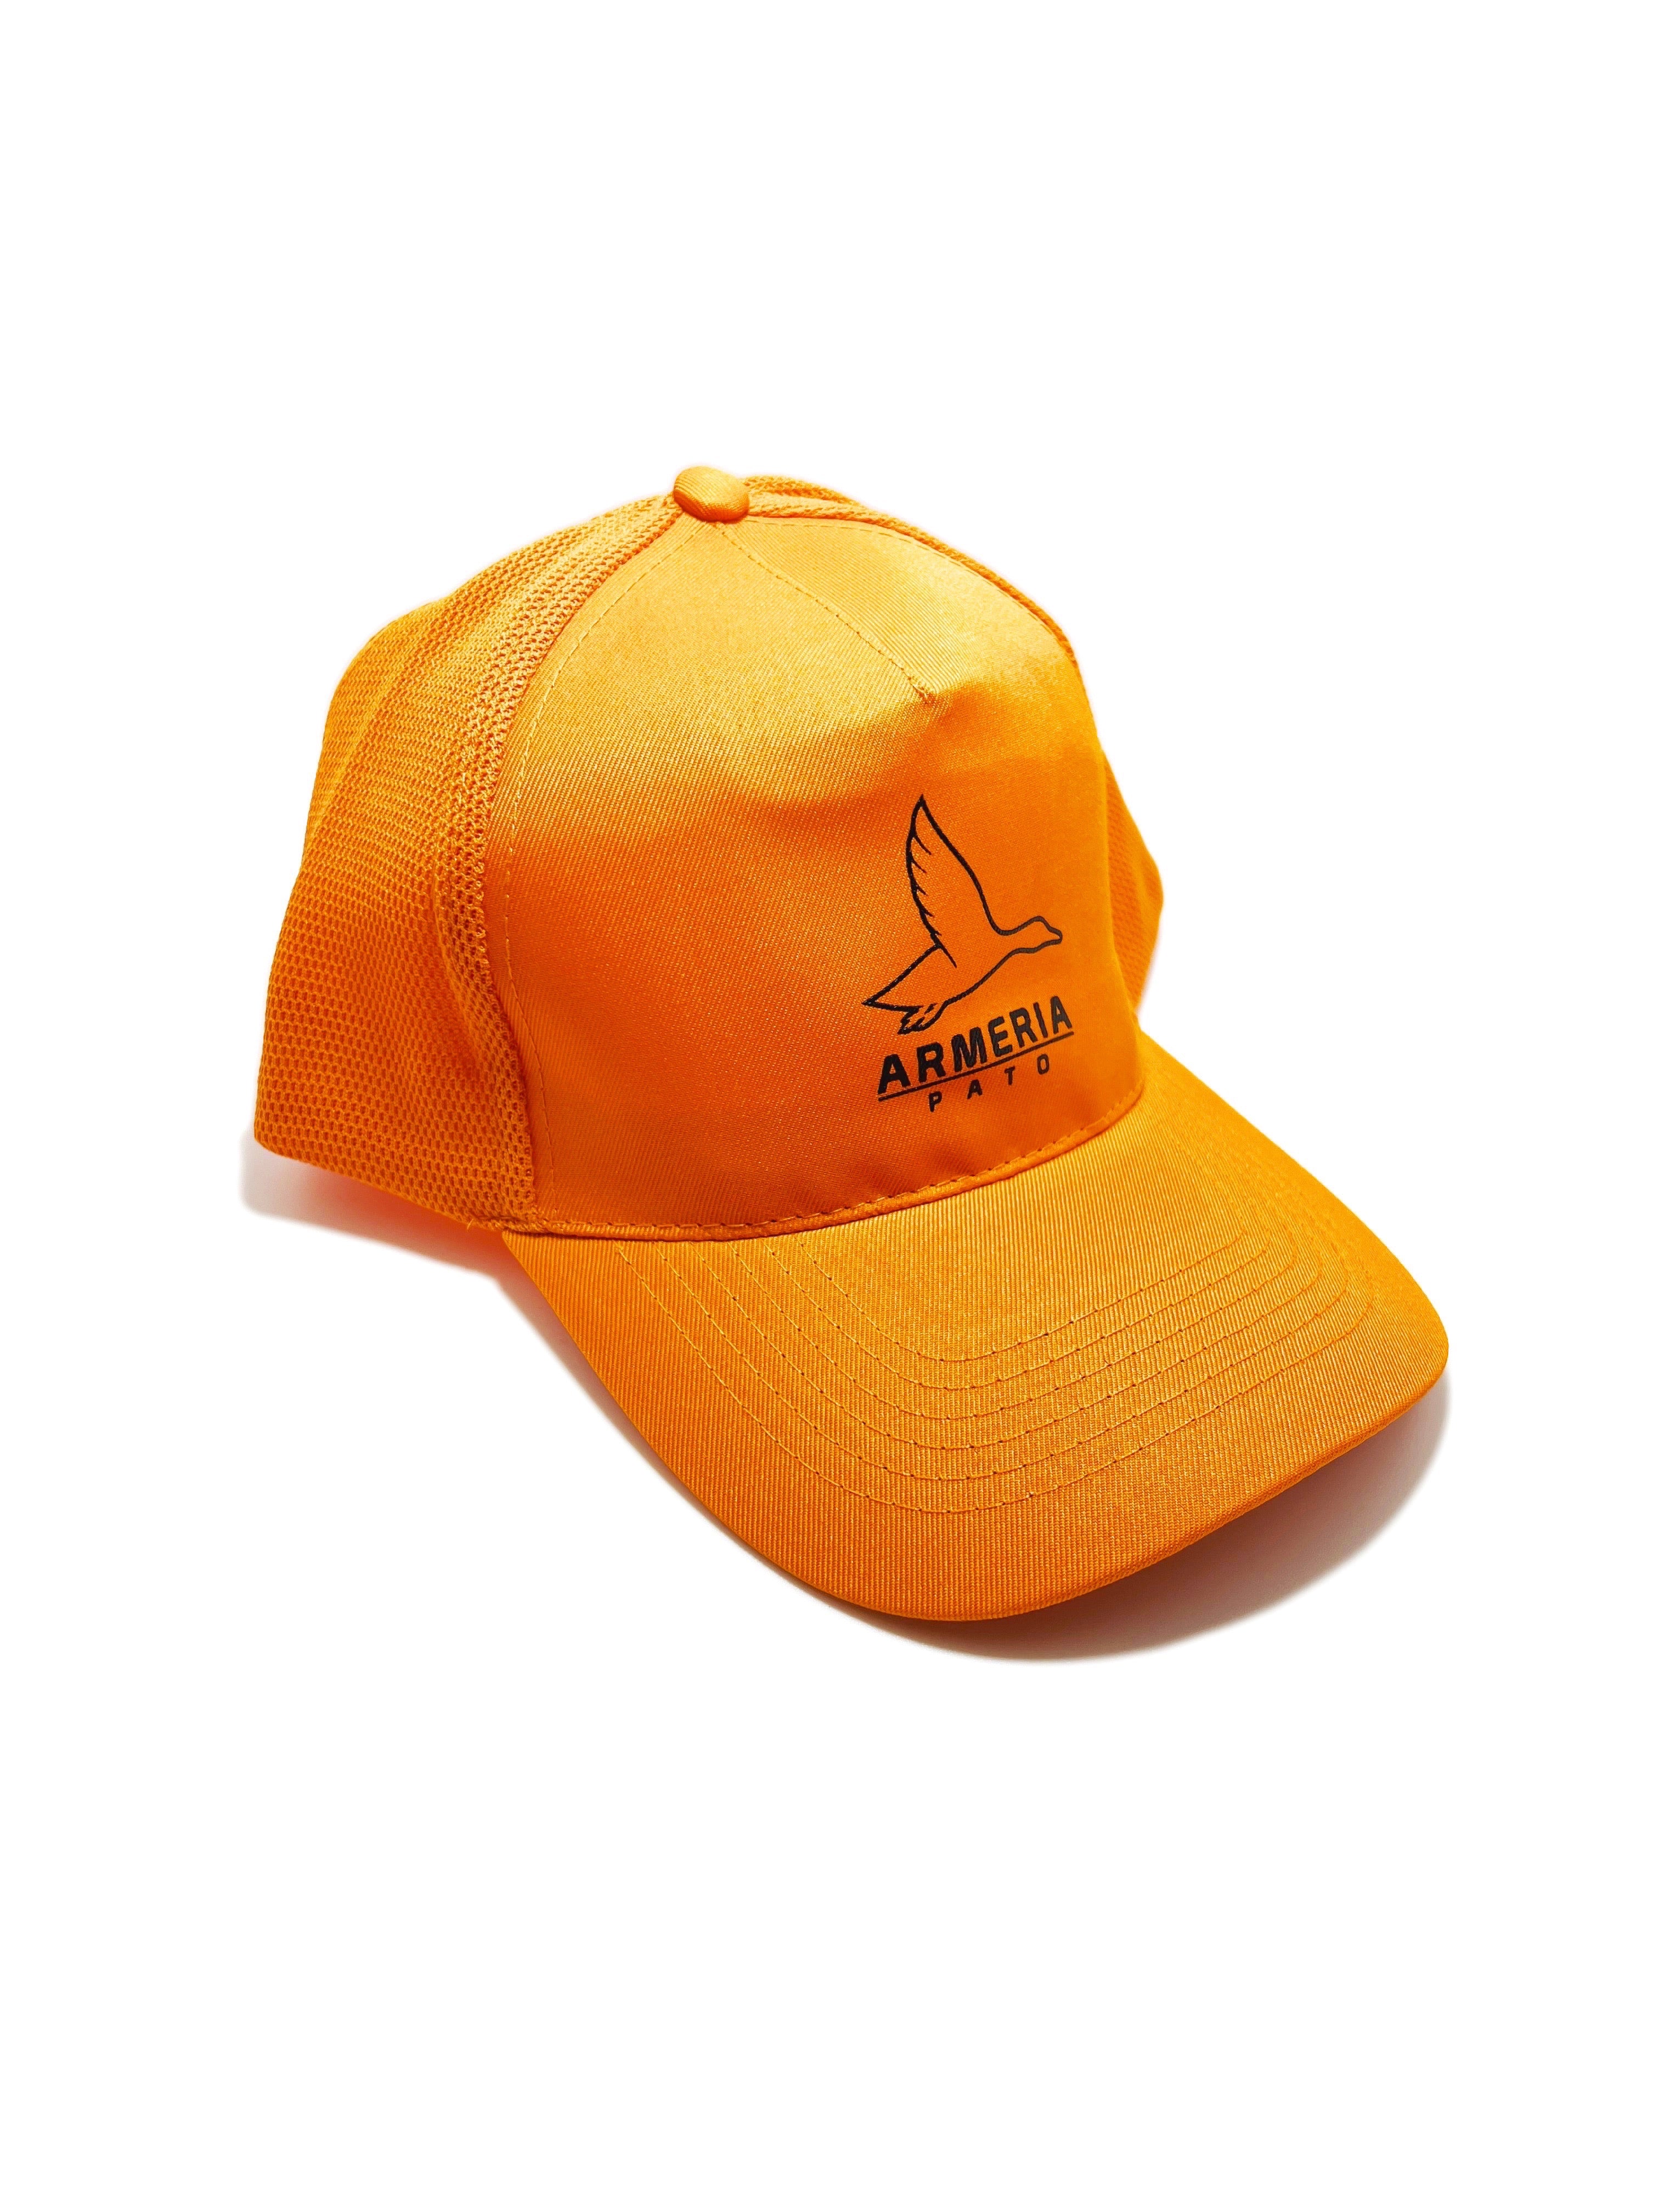 Breathable and Adjustable Summer Cap